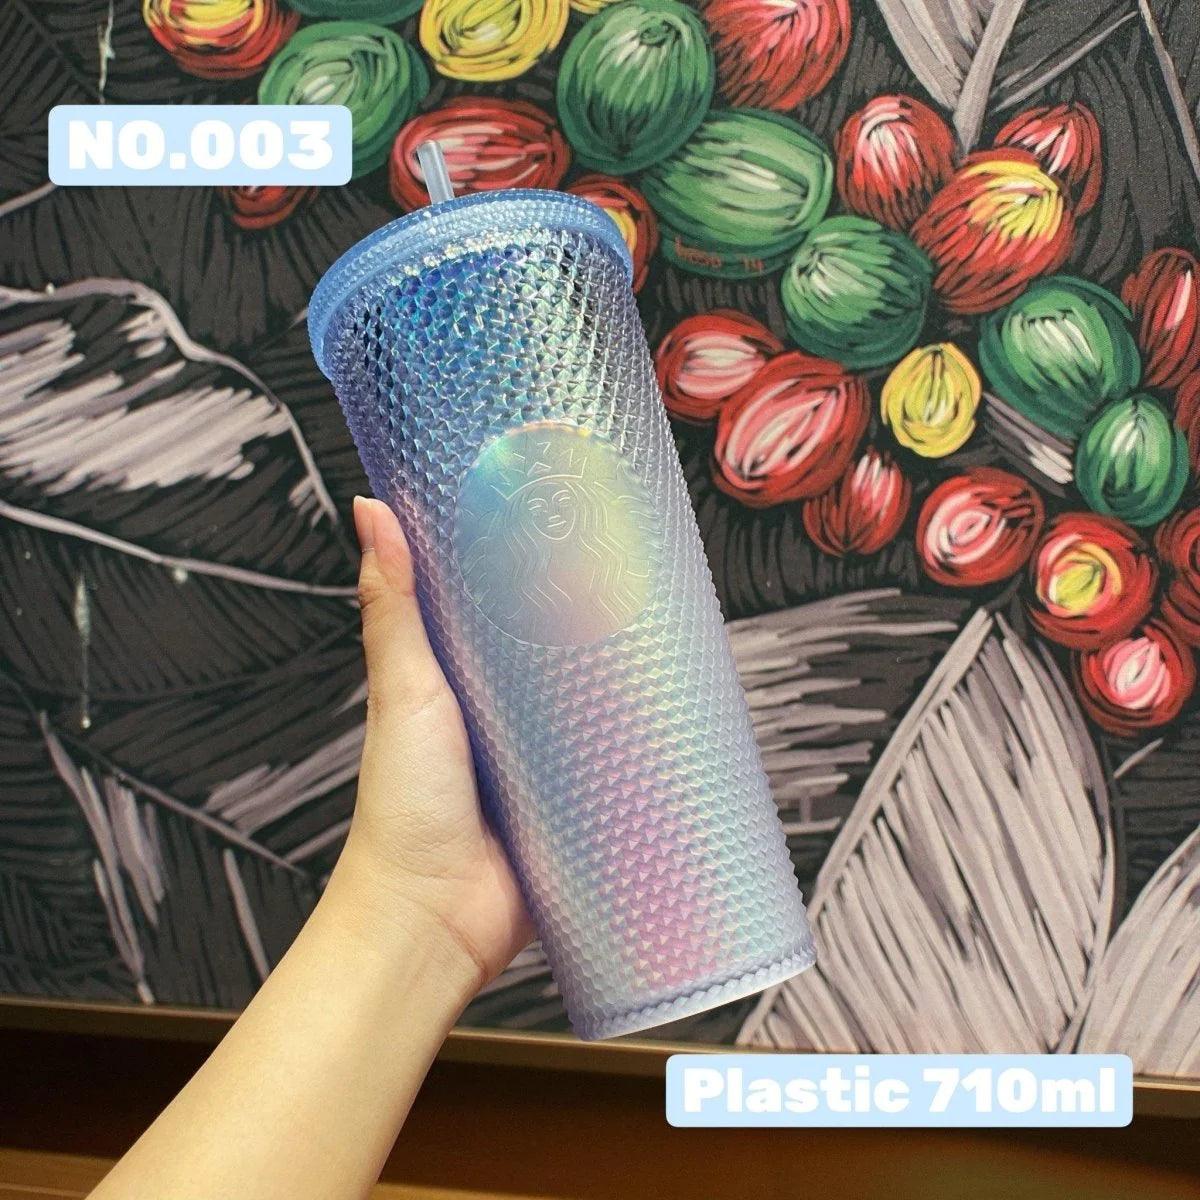 Celebrate with the Coolest Christmas Cup Yet!